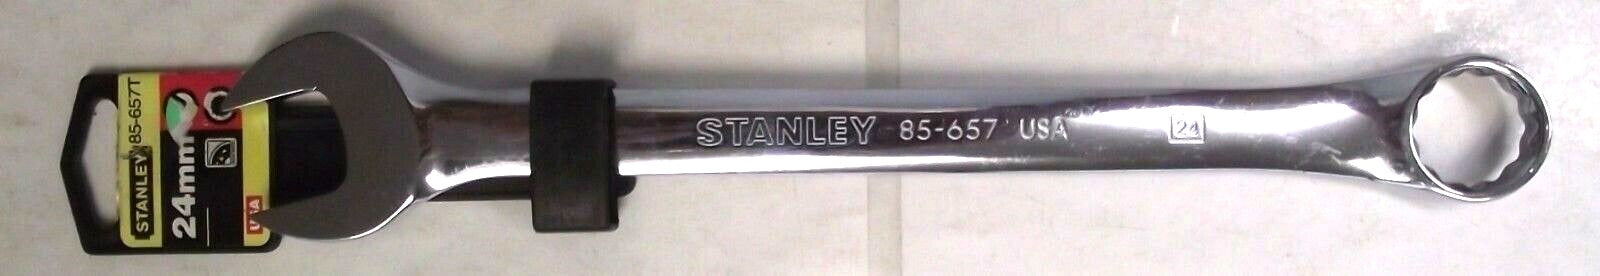 Stanley 85-657 24mm Full Polish Combination Wrench 12pt USA